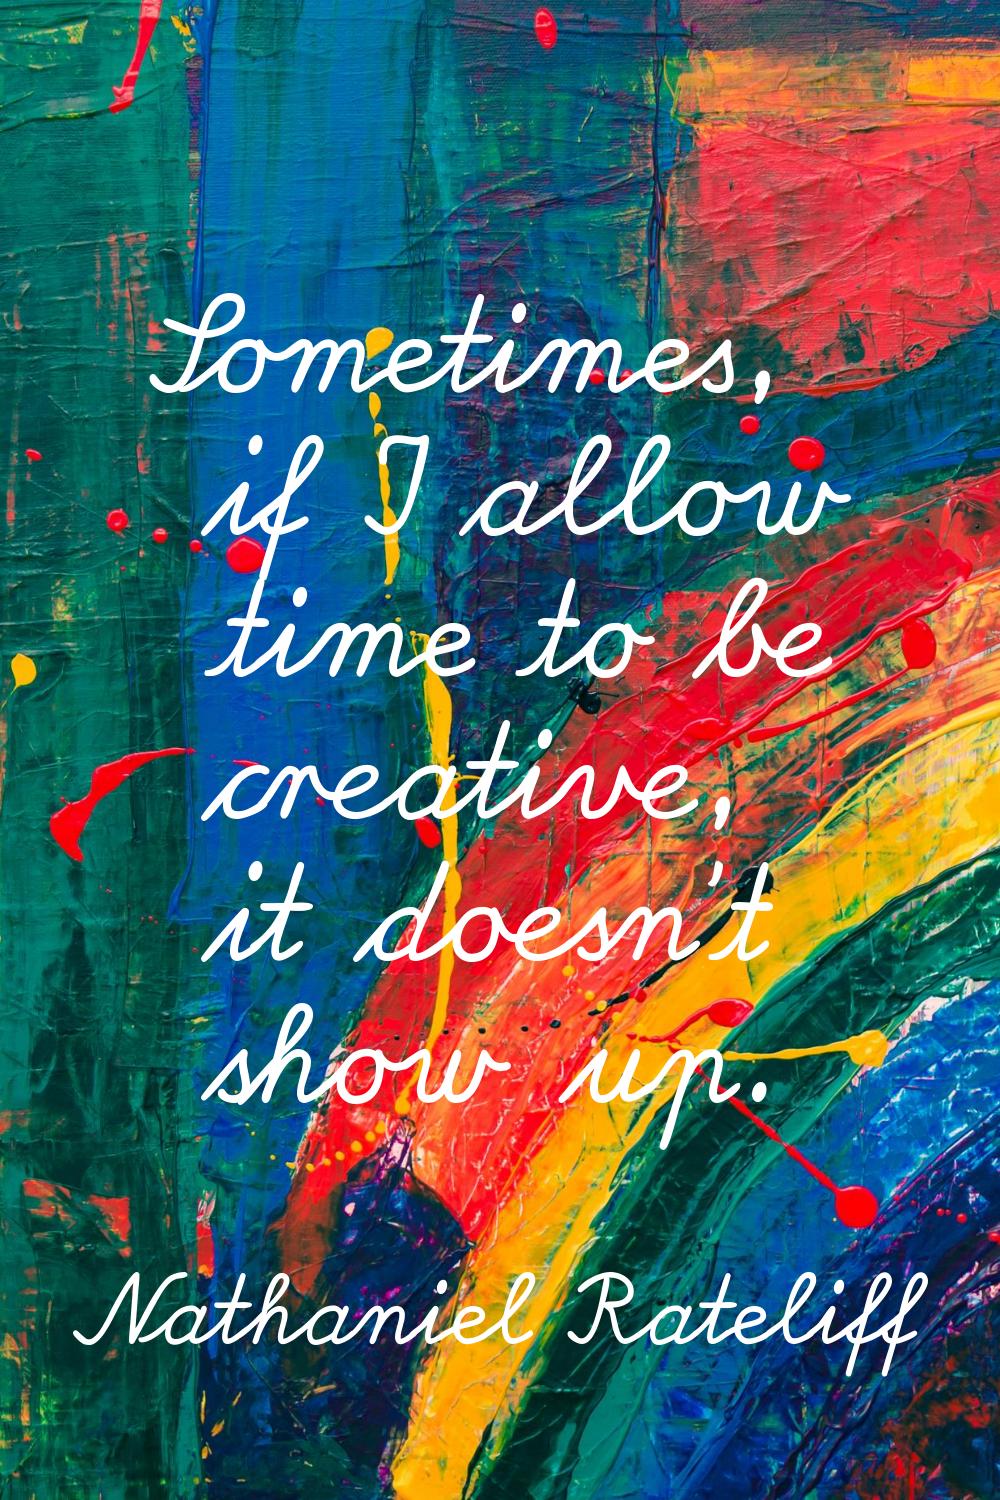 Sometimes, if I allow time to be creative, it doesn't show up.